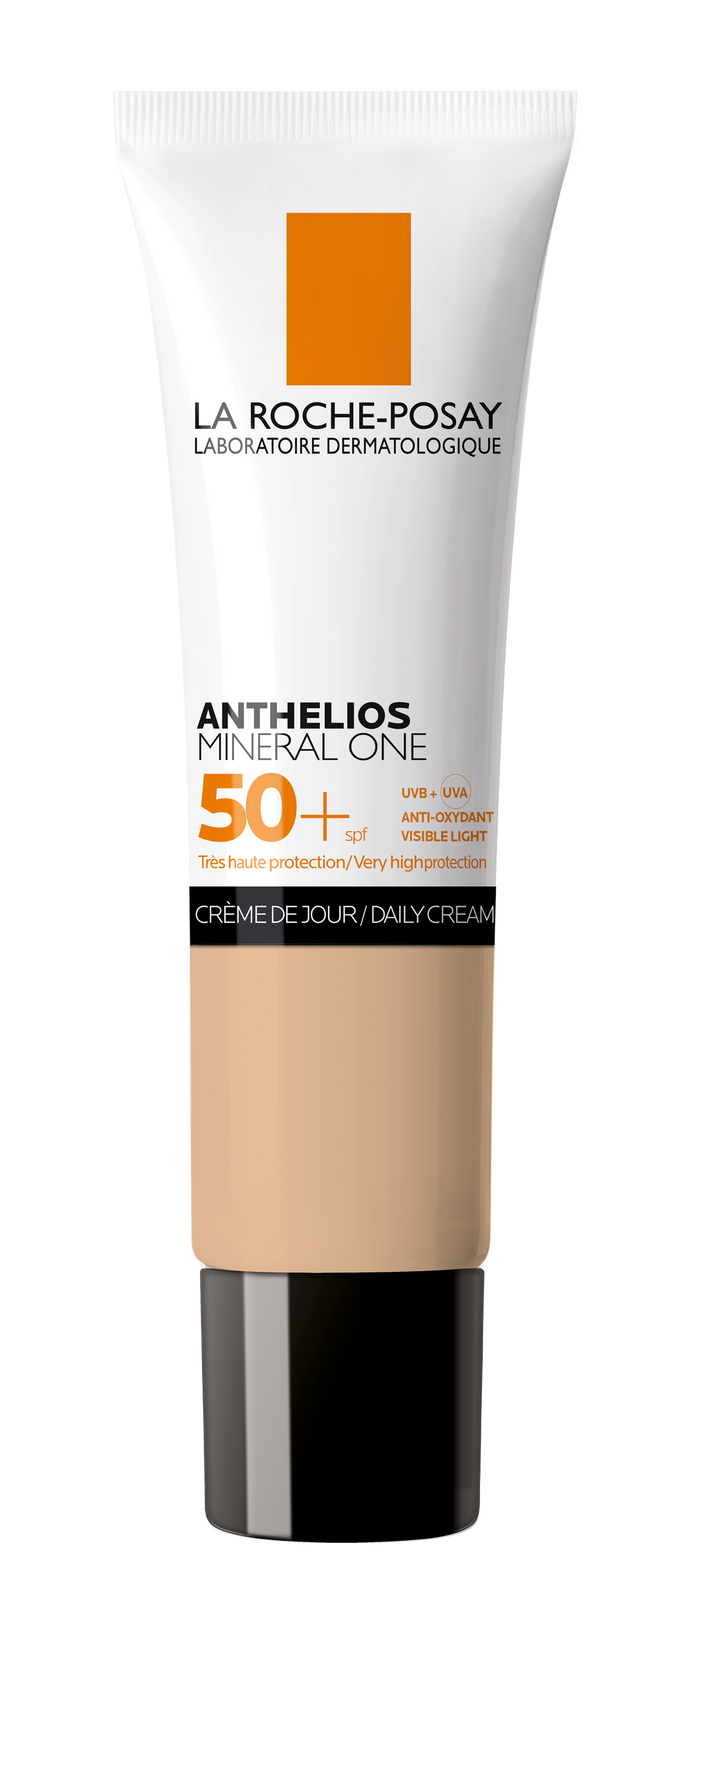 LRP Anthelios Mineral One SPF50+ T01 - SkinEffects Zwolle